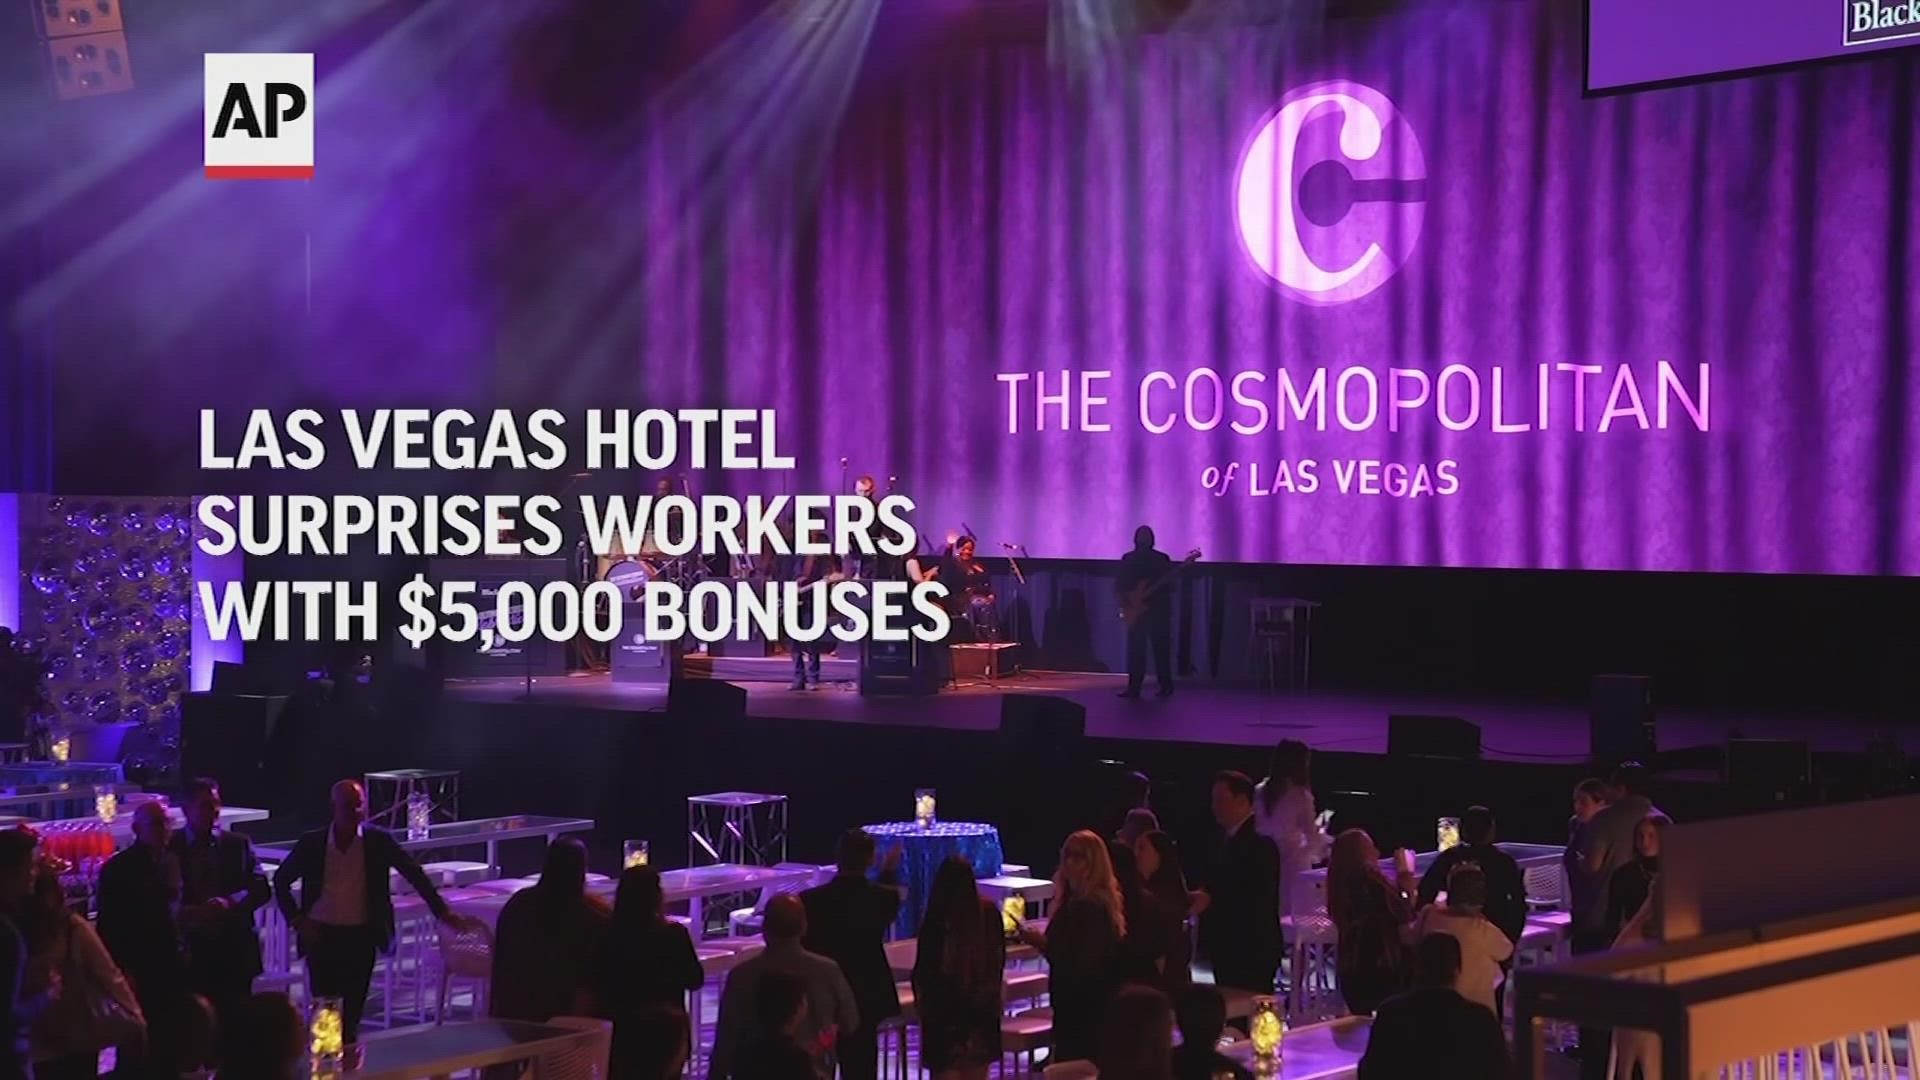 Joyous bedlam erupted Wednesday at The Cosmopolitan in Las Vegas when it was announced all 5,400 people who work there will receive a $5,000 bonus.